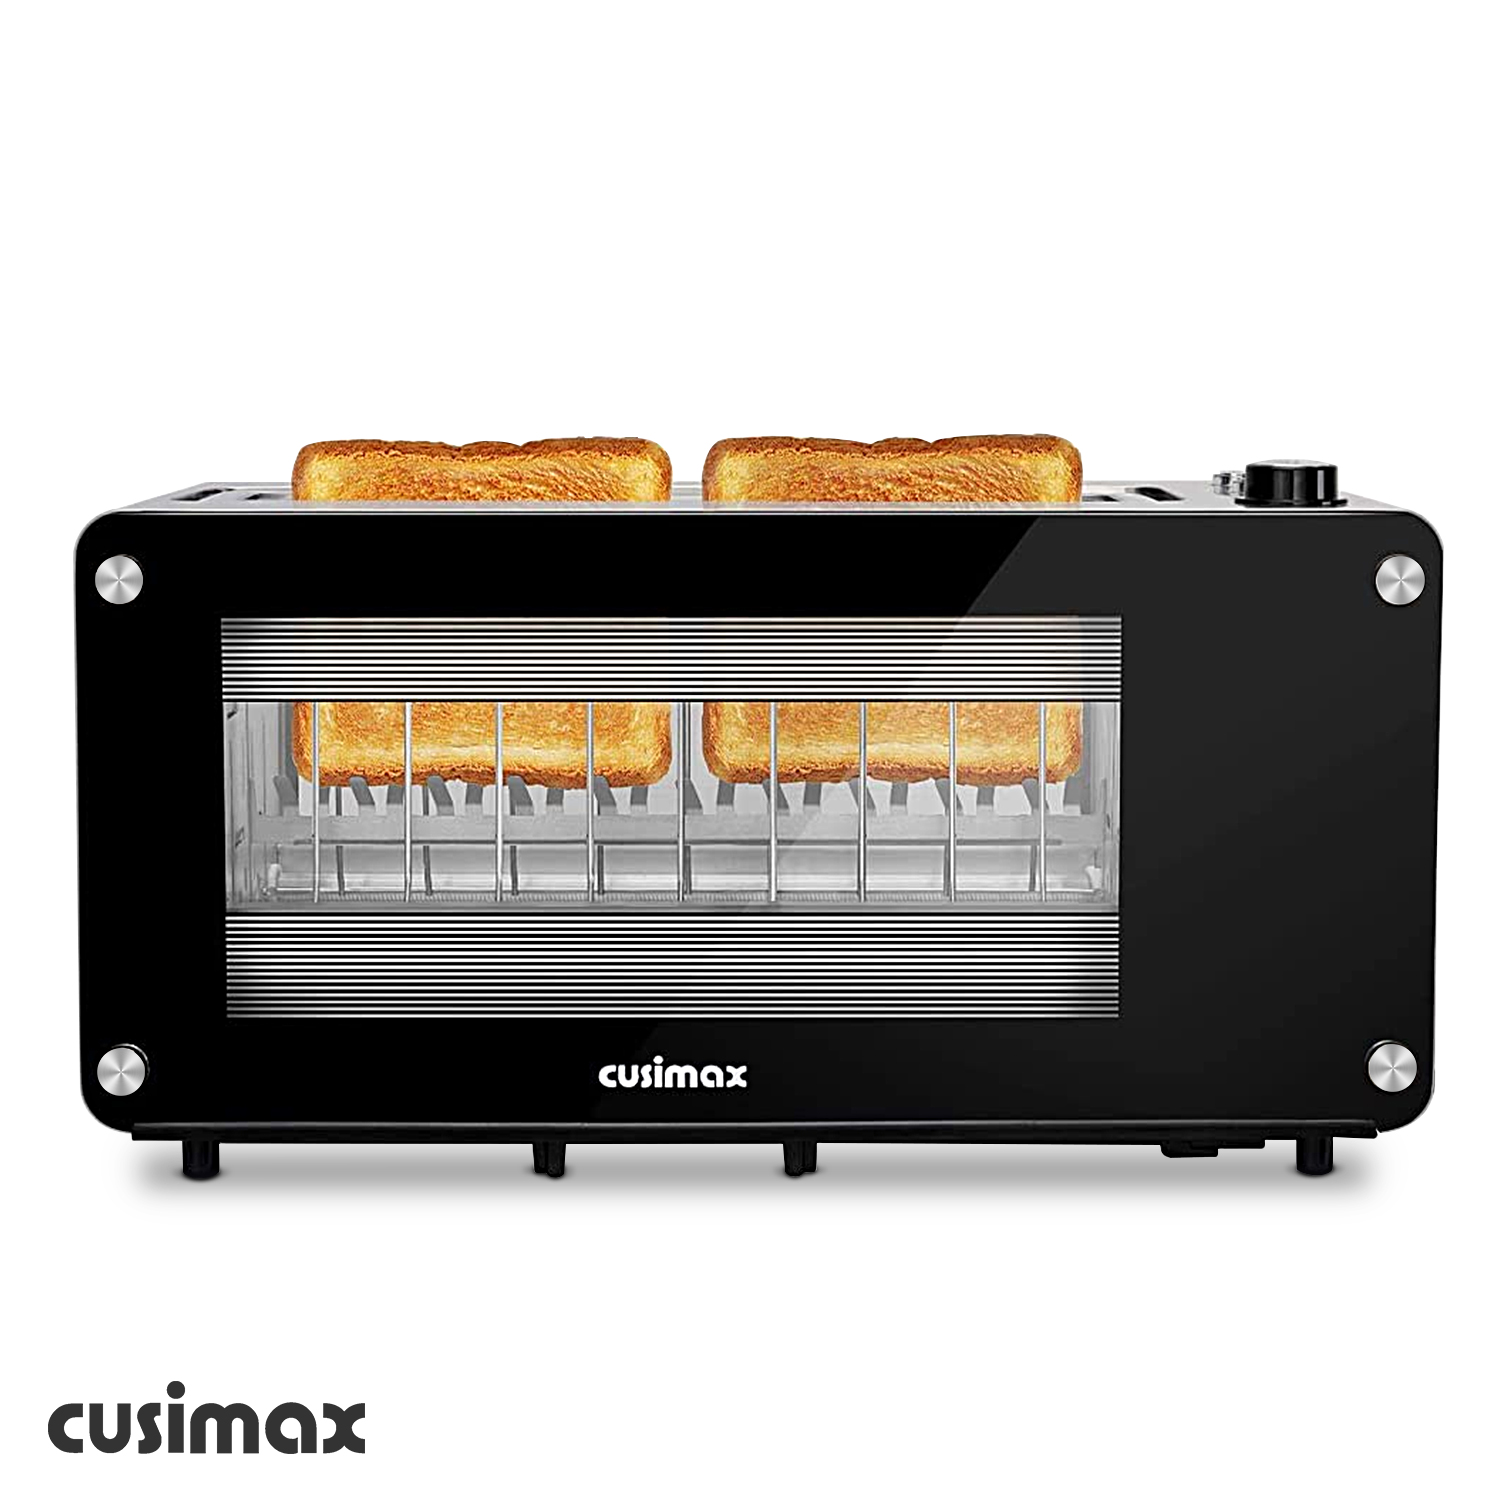 Cusimax Long Slot 2 Slice Toaster With Glass Window-Cusimax